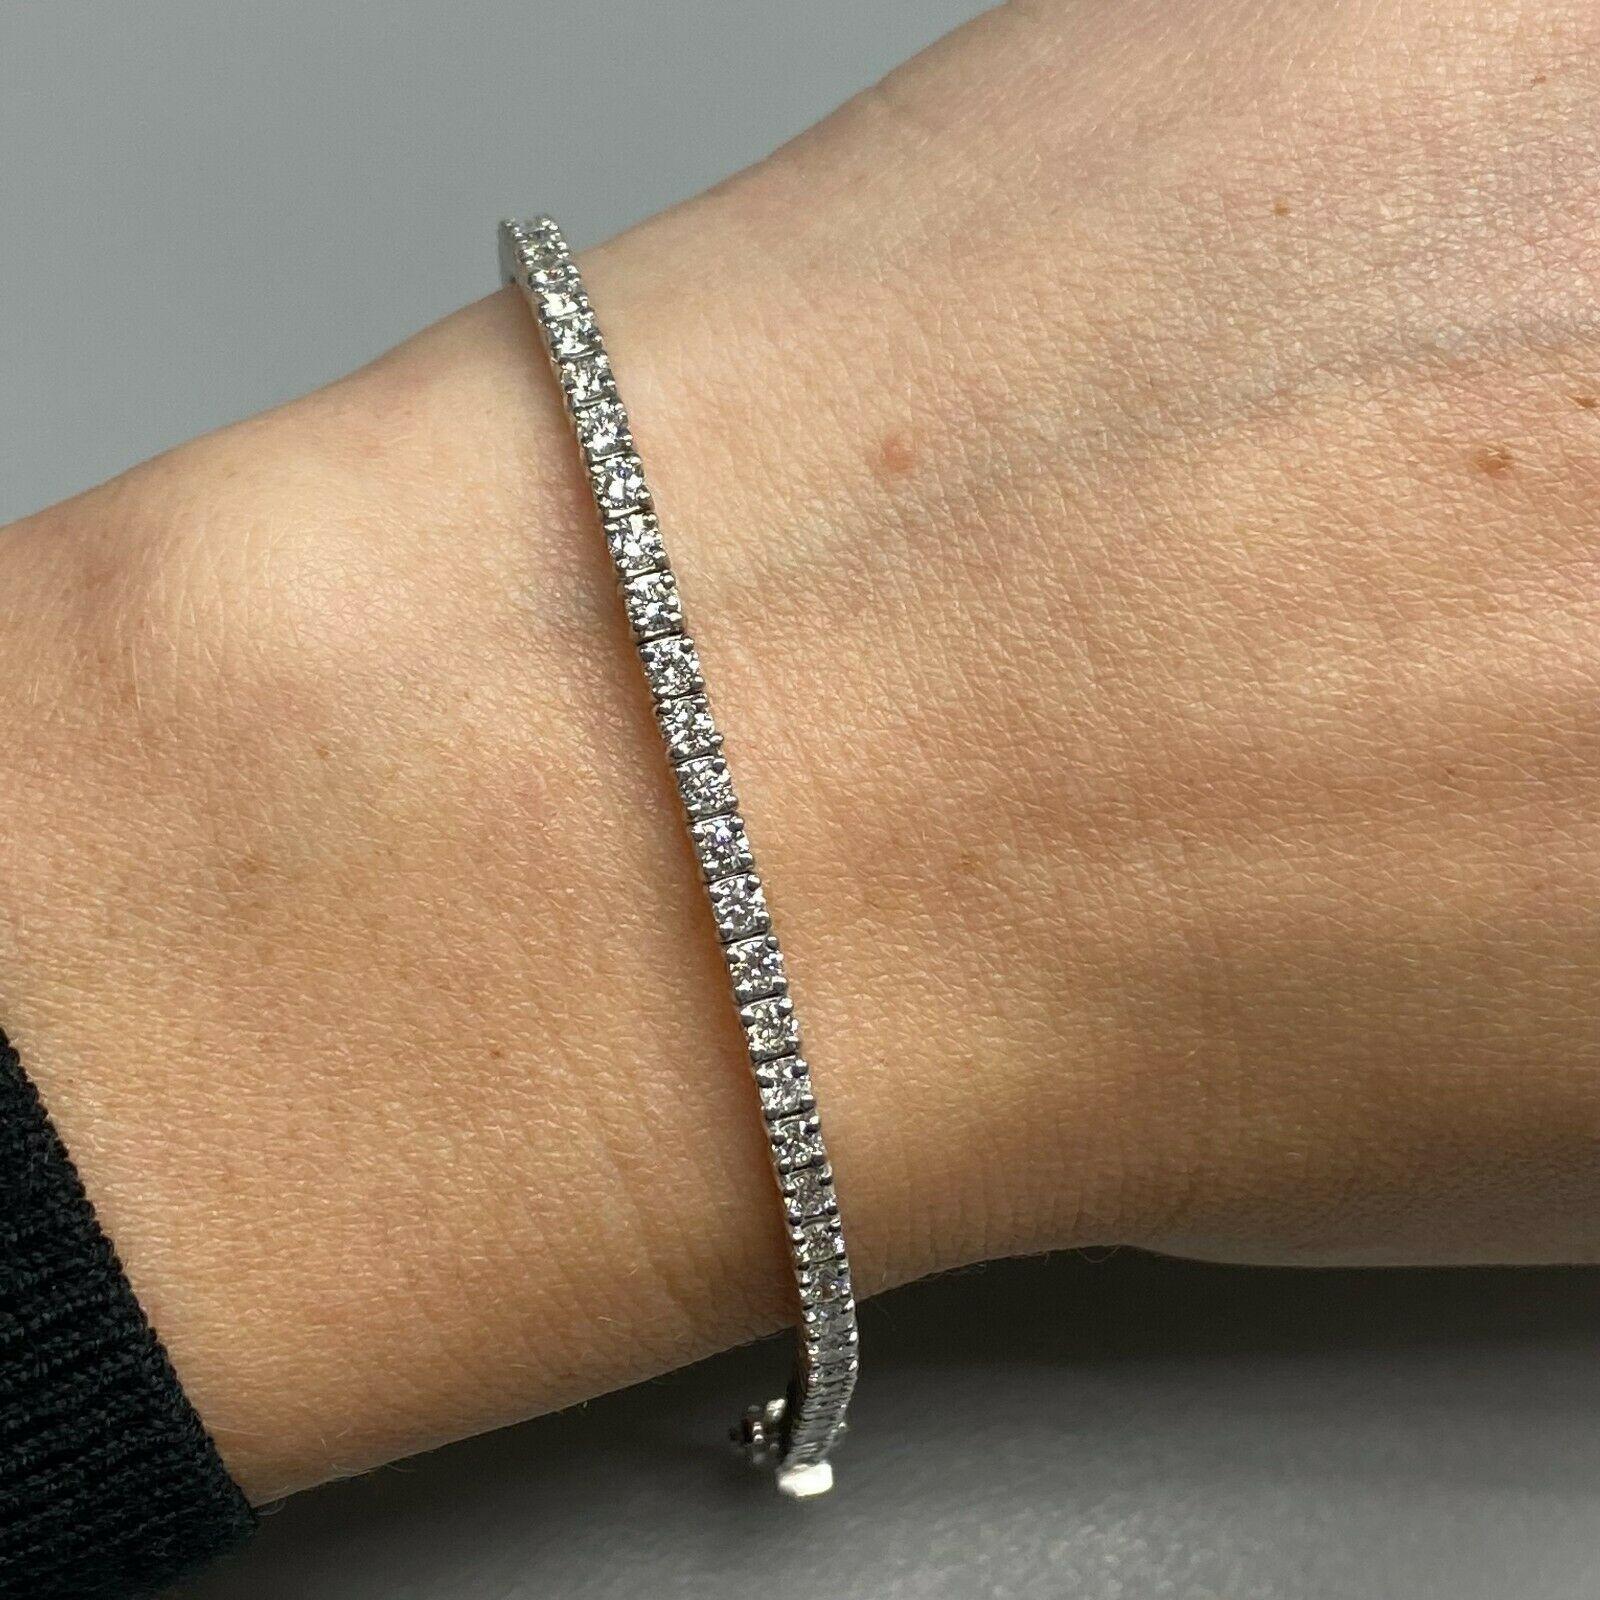 Contemporary 14k White Gold Diamond Tennis Bracelet Weighing 4.35 CTW For Sale